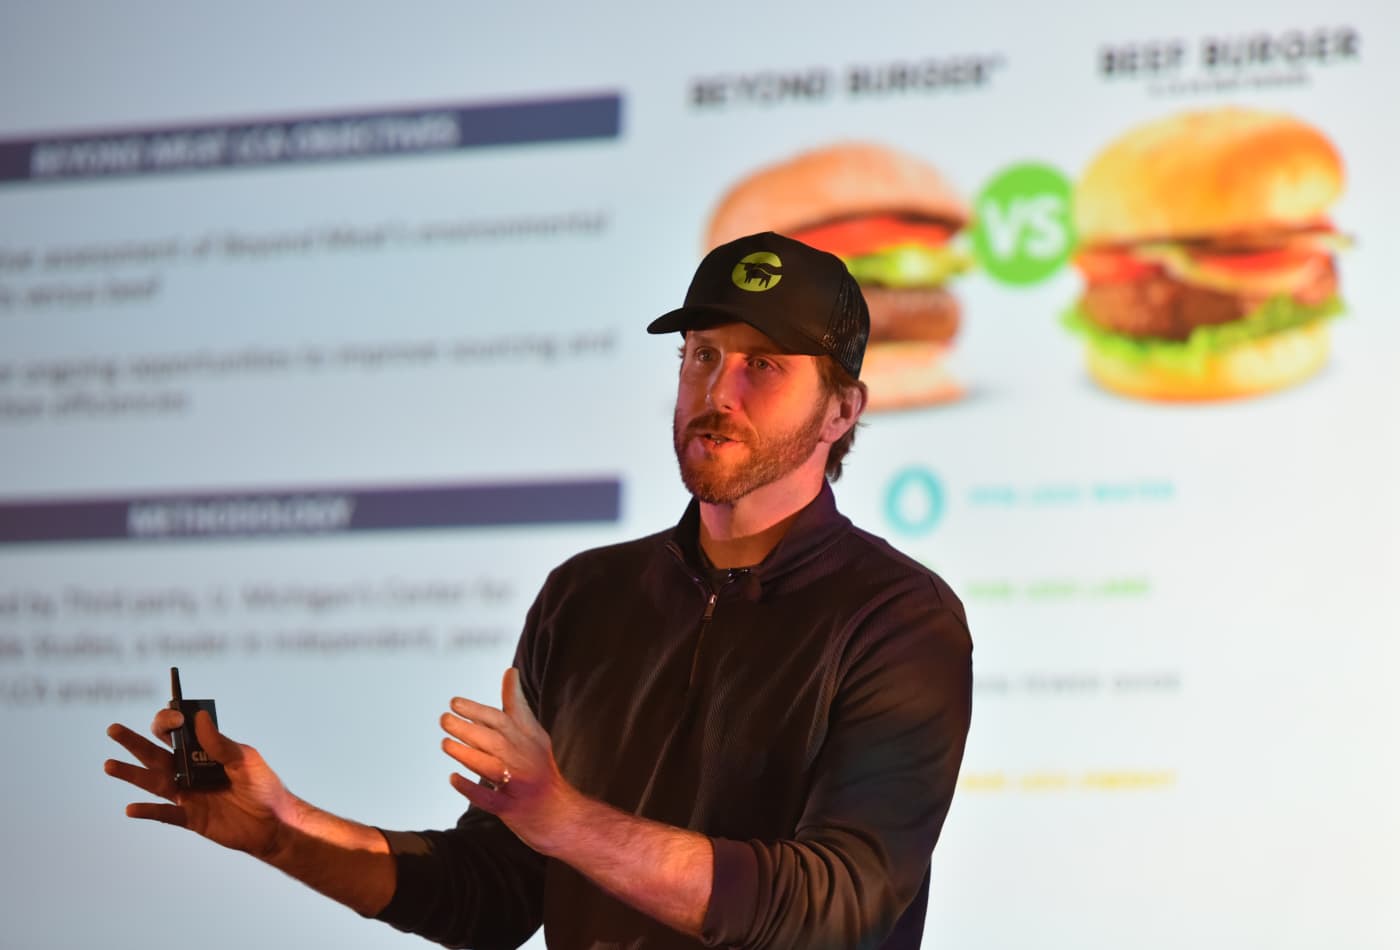 Ethan Brown CEO of Beyond Meat talks during the Unlocking the Future of Protein Speaker Series at the Wellness Your Way Festival at the Colorado Convention Center on August 17, 2019 in Denver, Colorado.